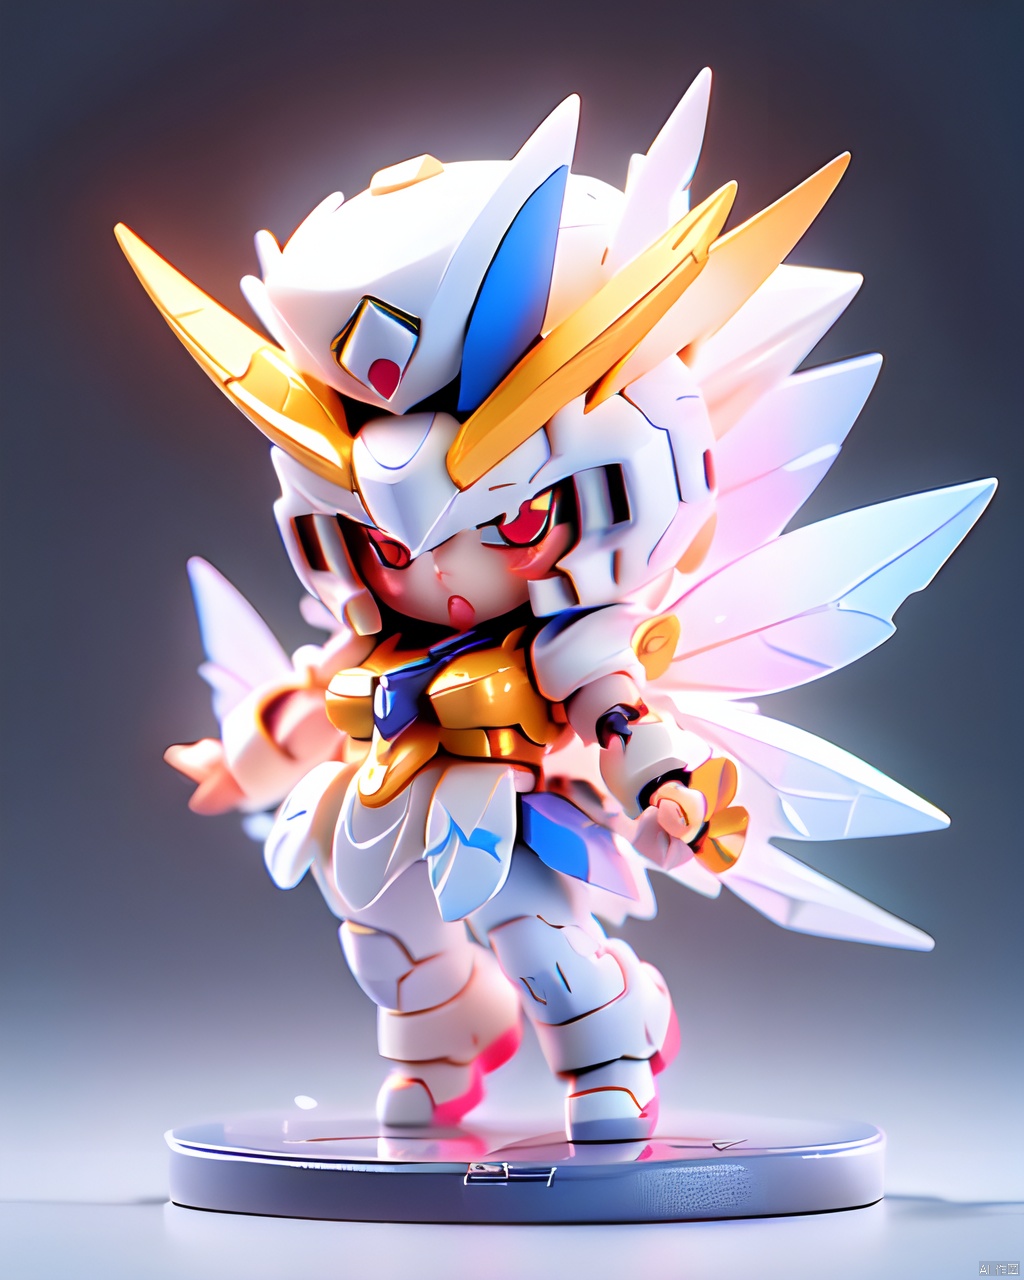  gdsj,(Full body photo),1 Transparent cute fairy,(Exquisite hat:1.2),Fantasy glow,clean,white background,(Raytracing, HDR, Reasonable design, High detail, Masterpiece, Best quality, Ultra HD),light blueuniform,, ( figma:0.8)